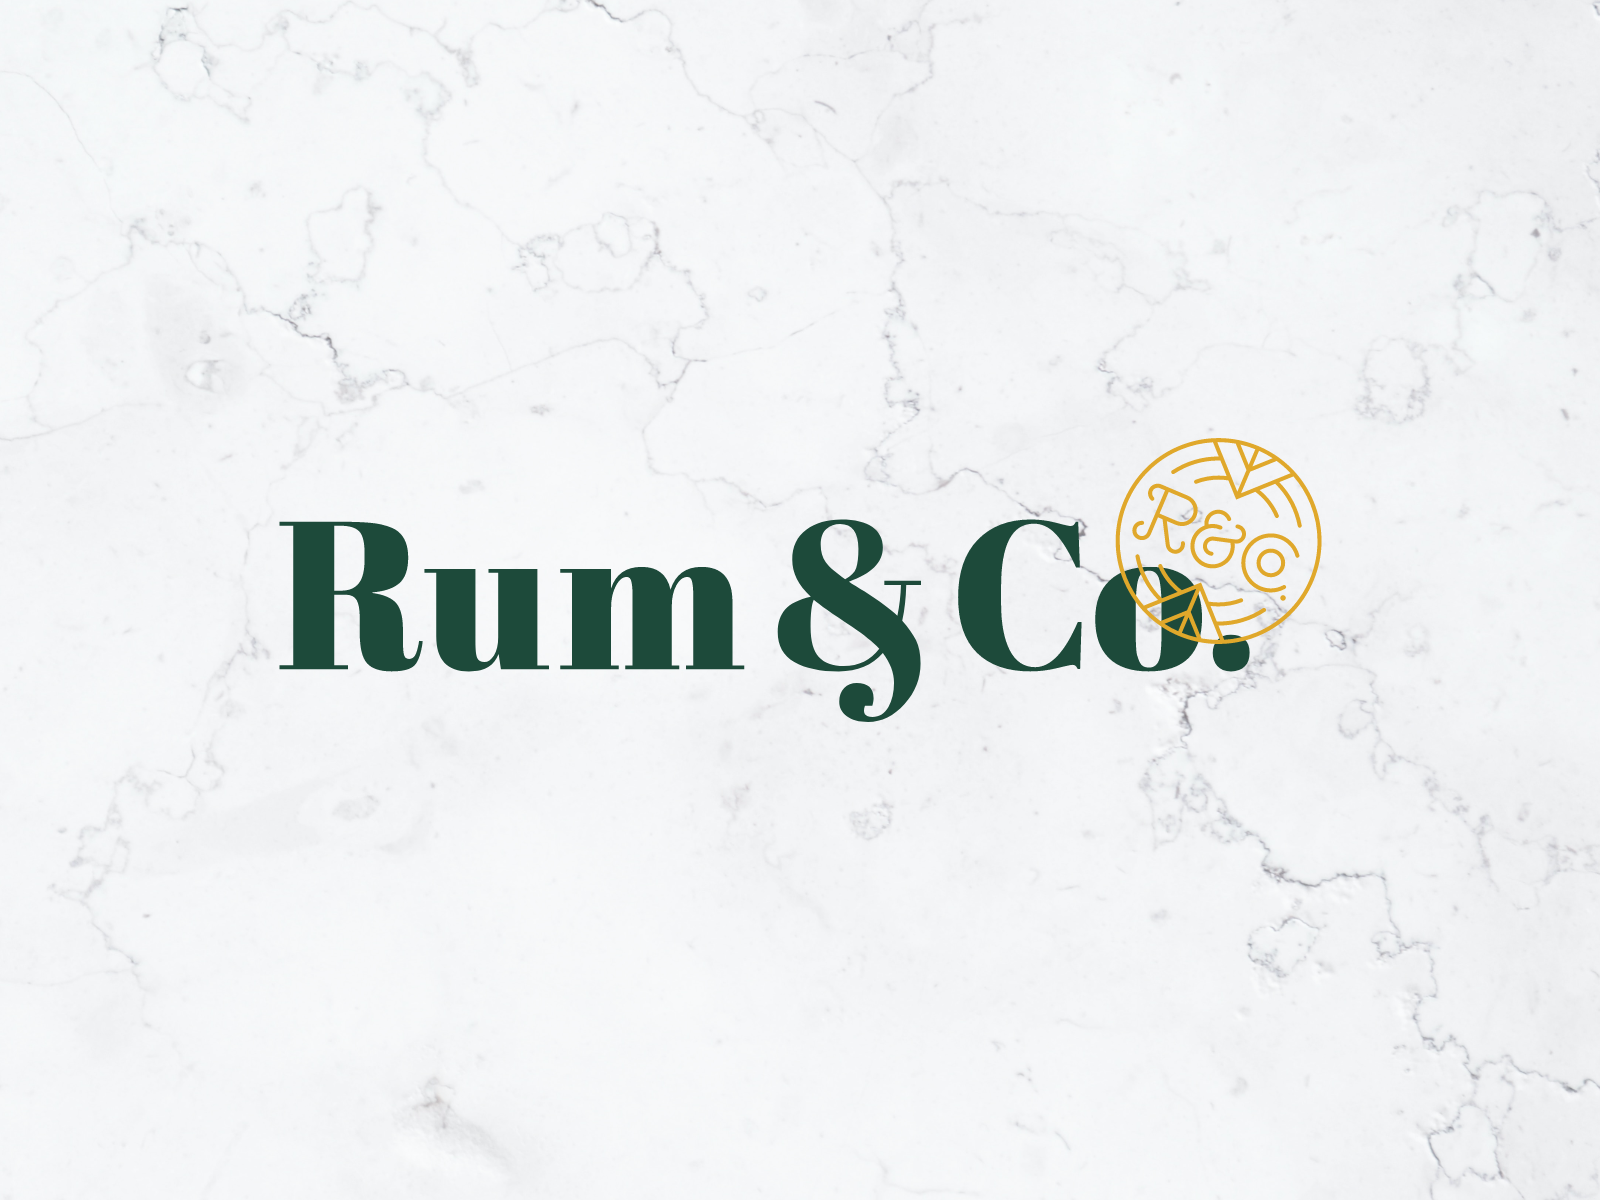 Ice Stamp Rum & Co. by Chas Turansky for Nikao Studio on Dribbble